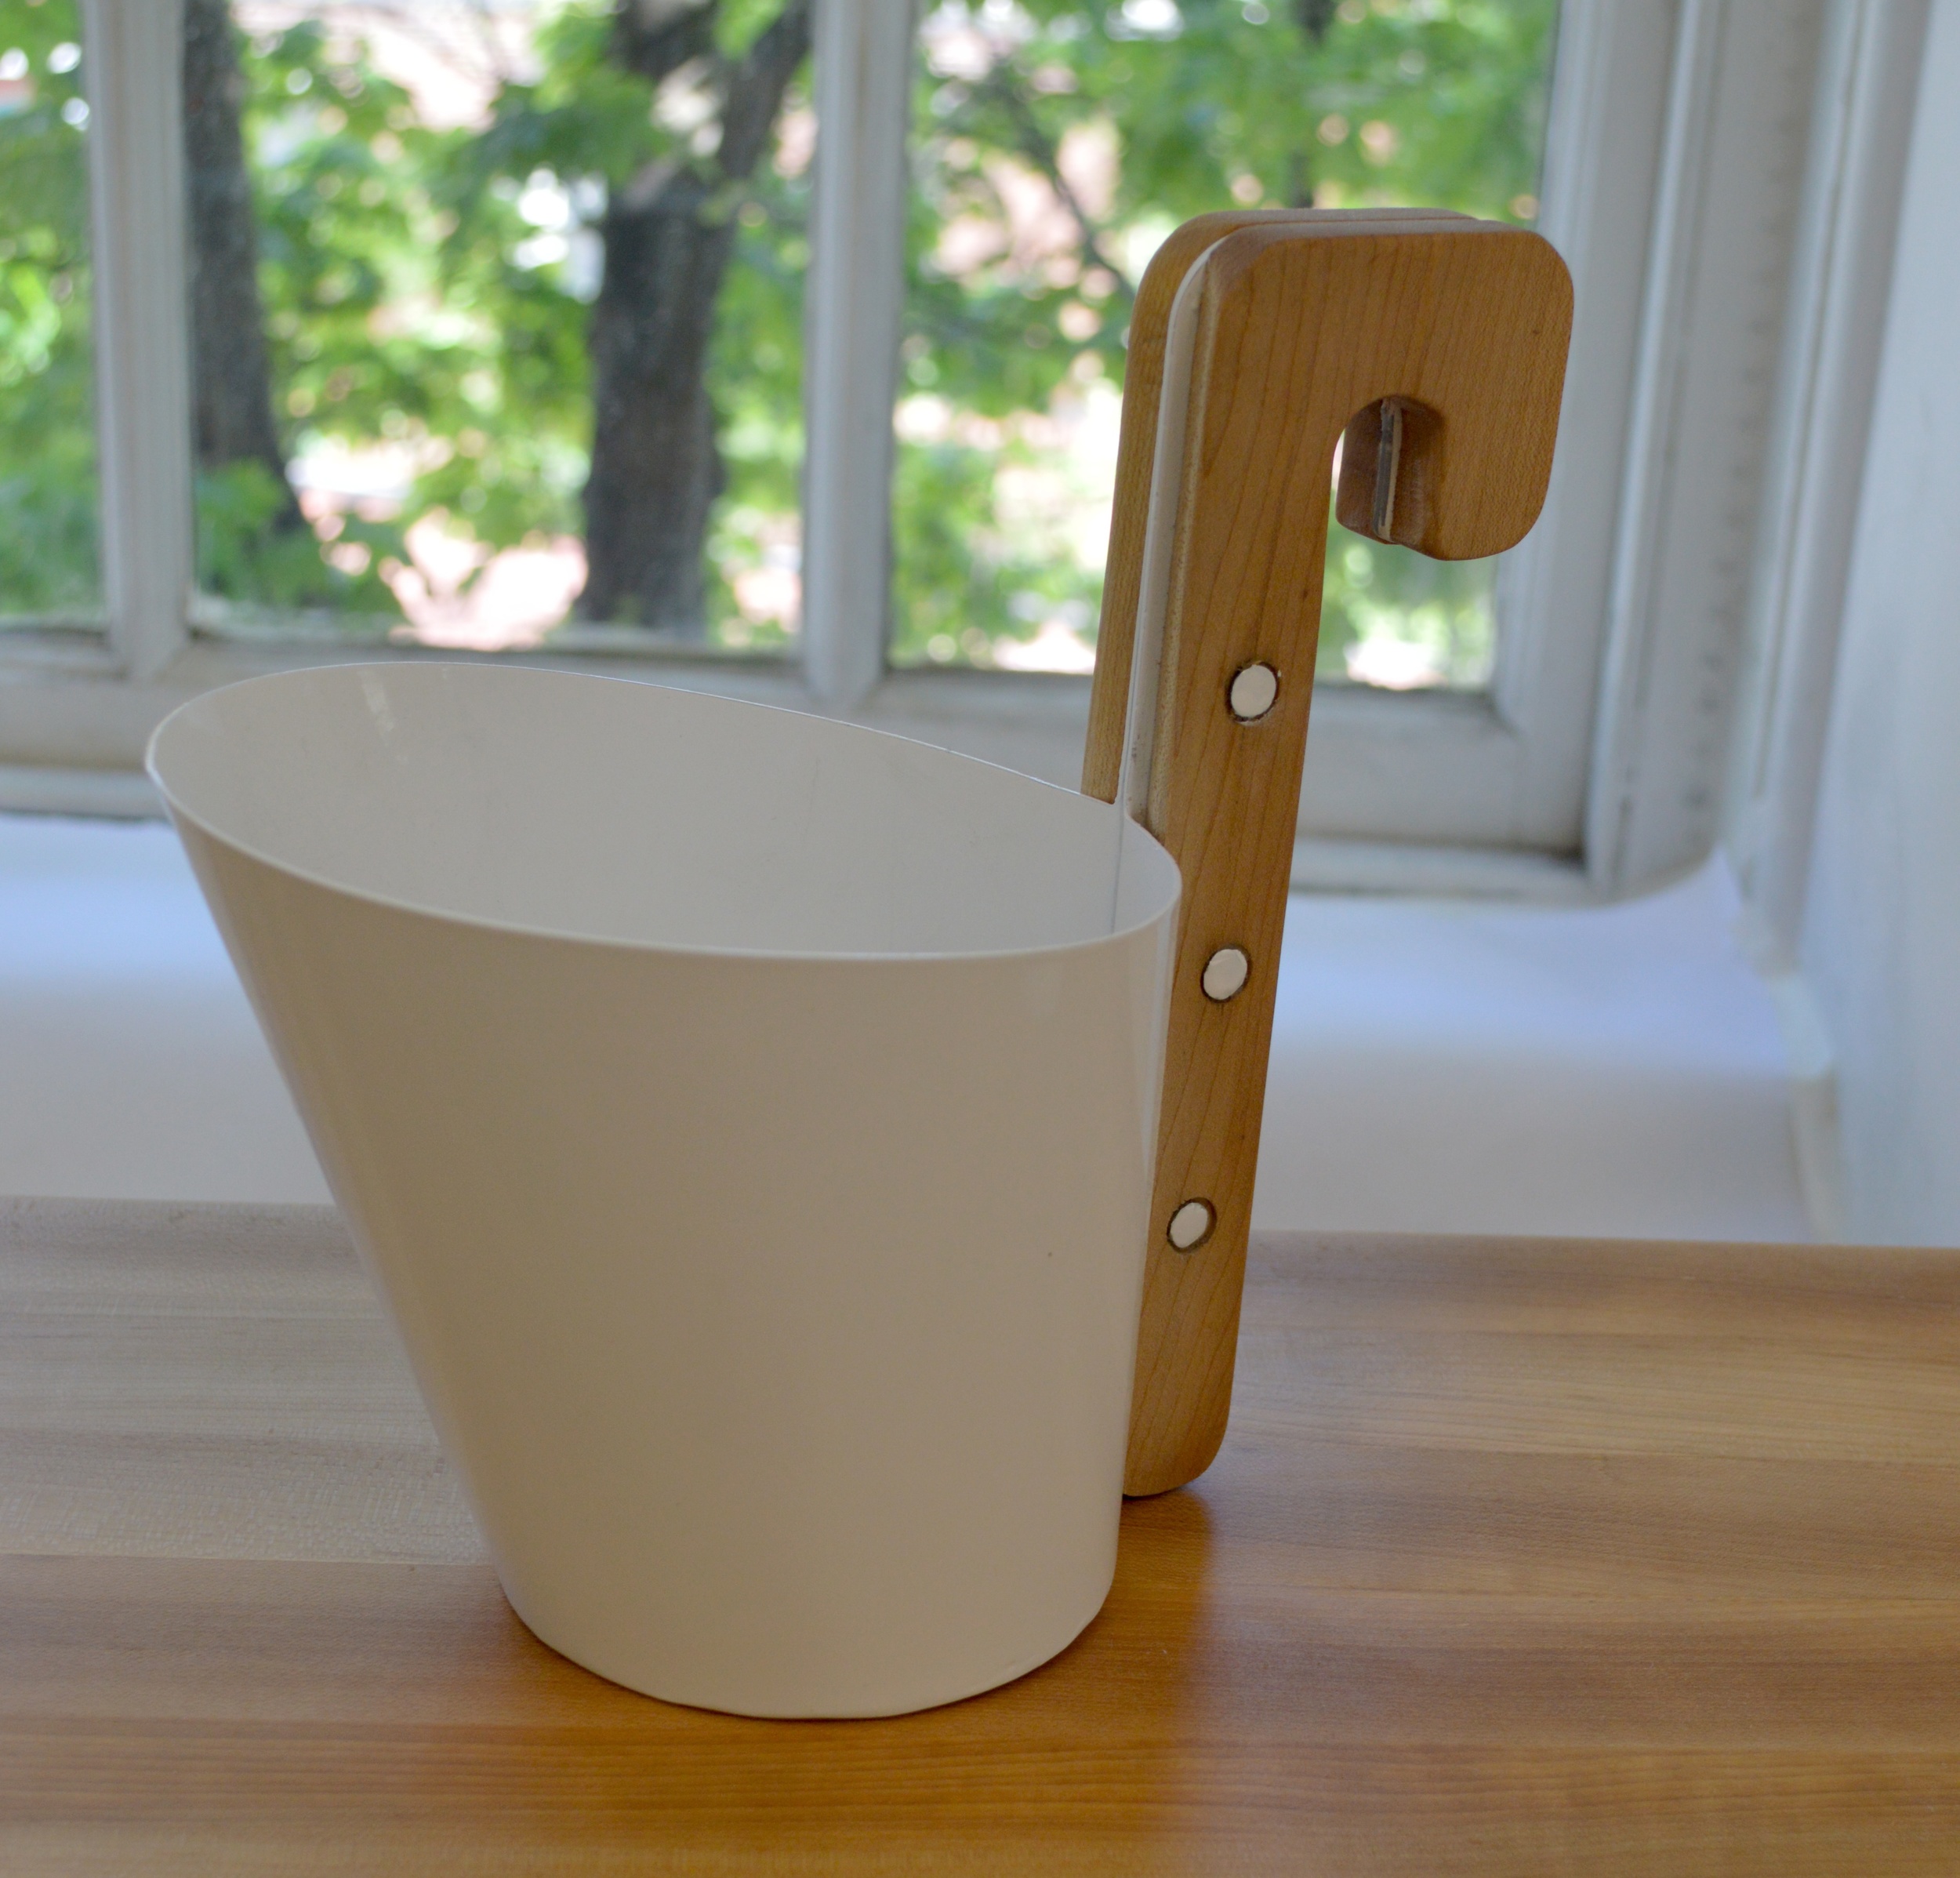 Planters are hung on the kitchen system. You can also store kitchen tools like wooden spoons in the container.